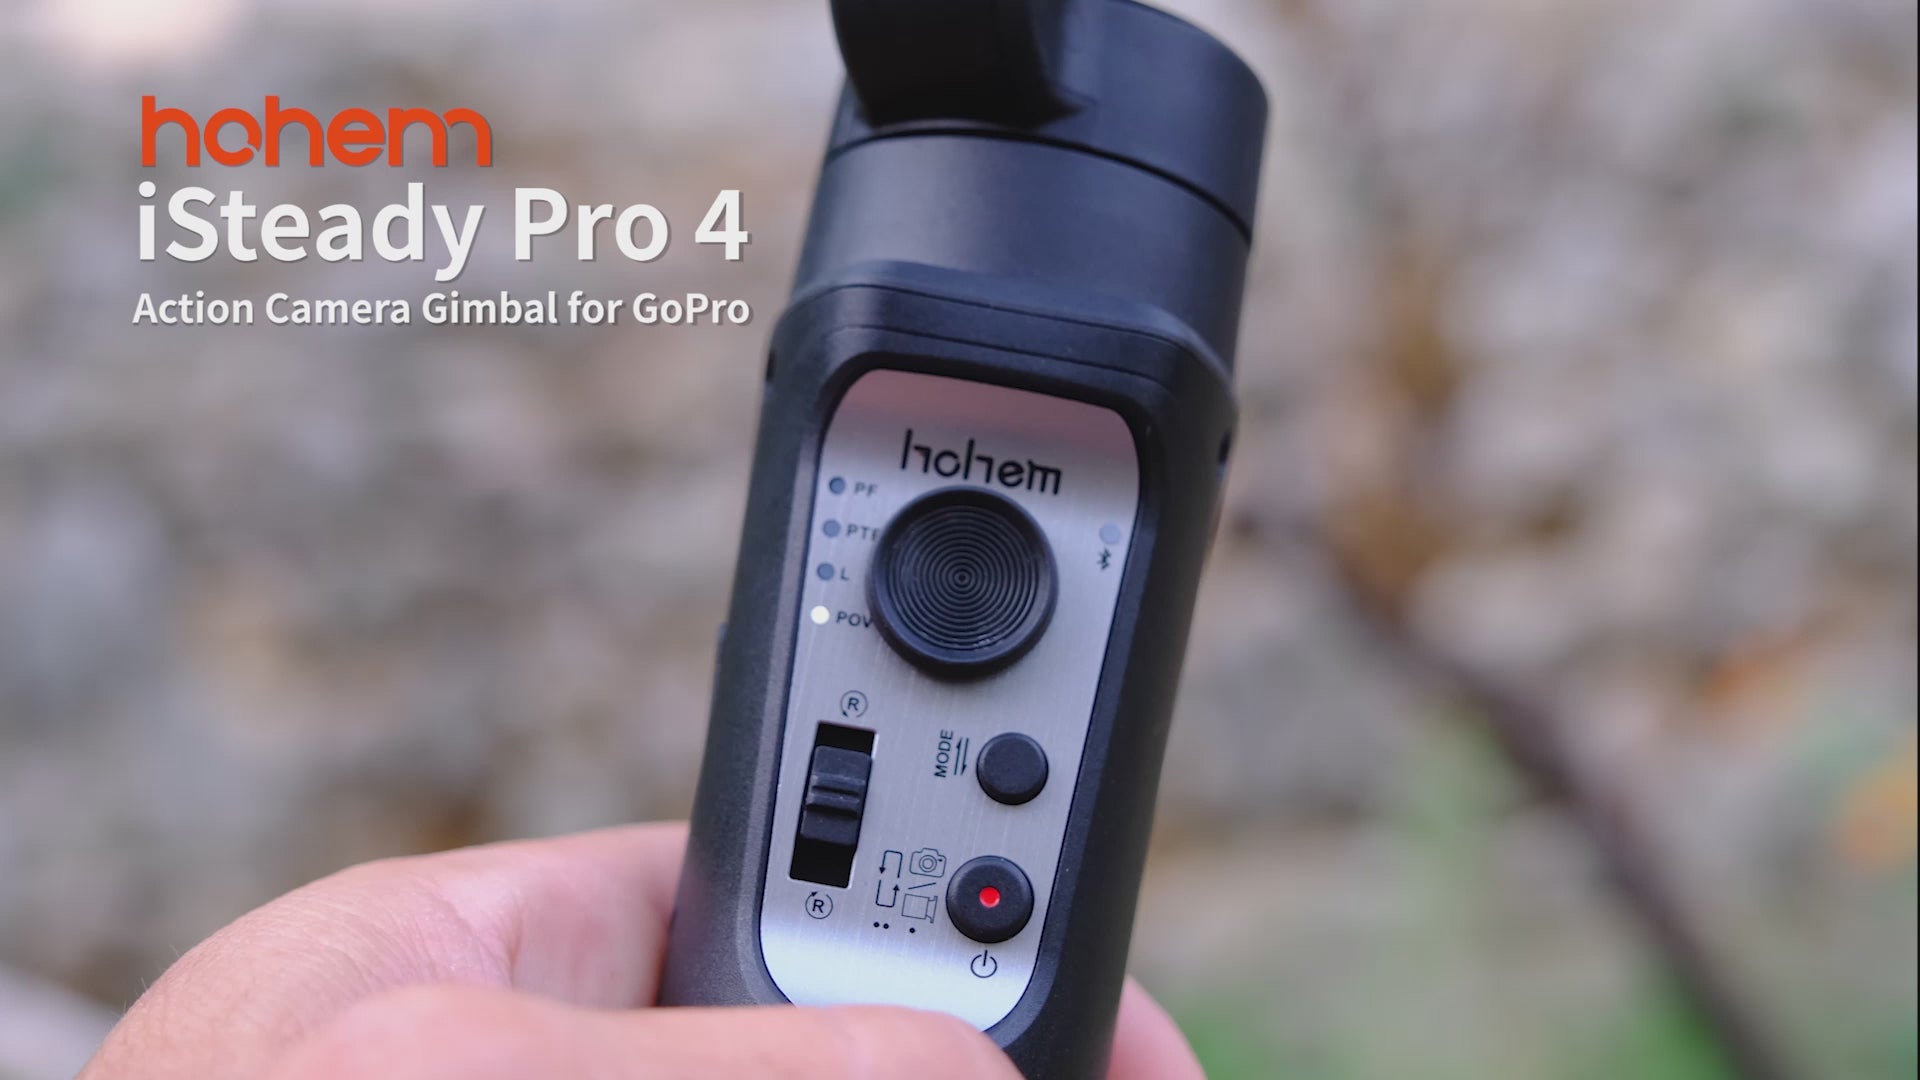 3 Axis Gimbal Stabilizer for Gopro Action Camera: iSteady Pro4